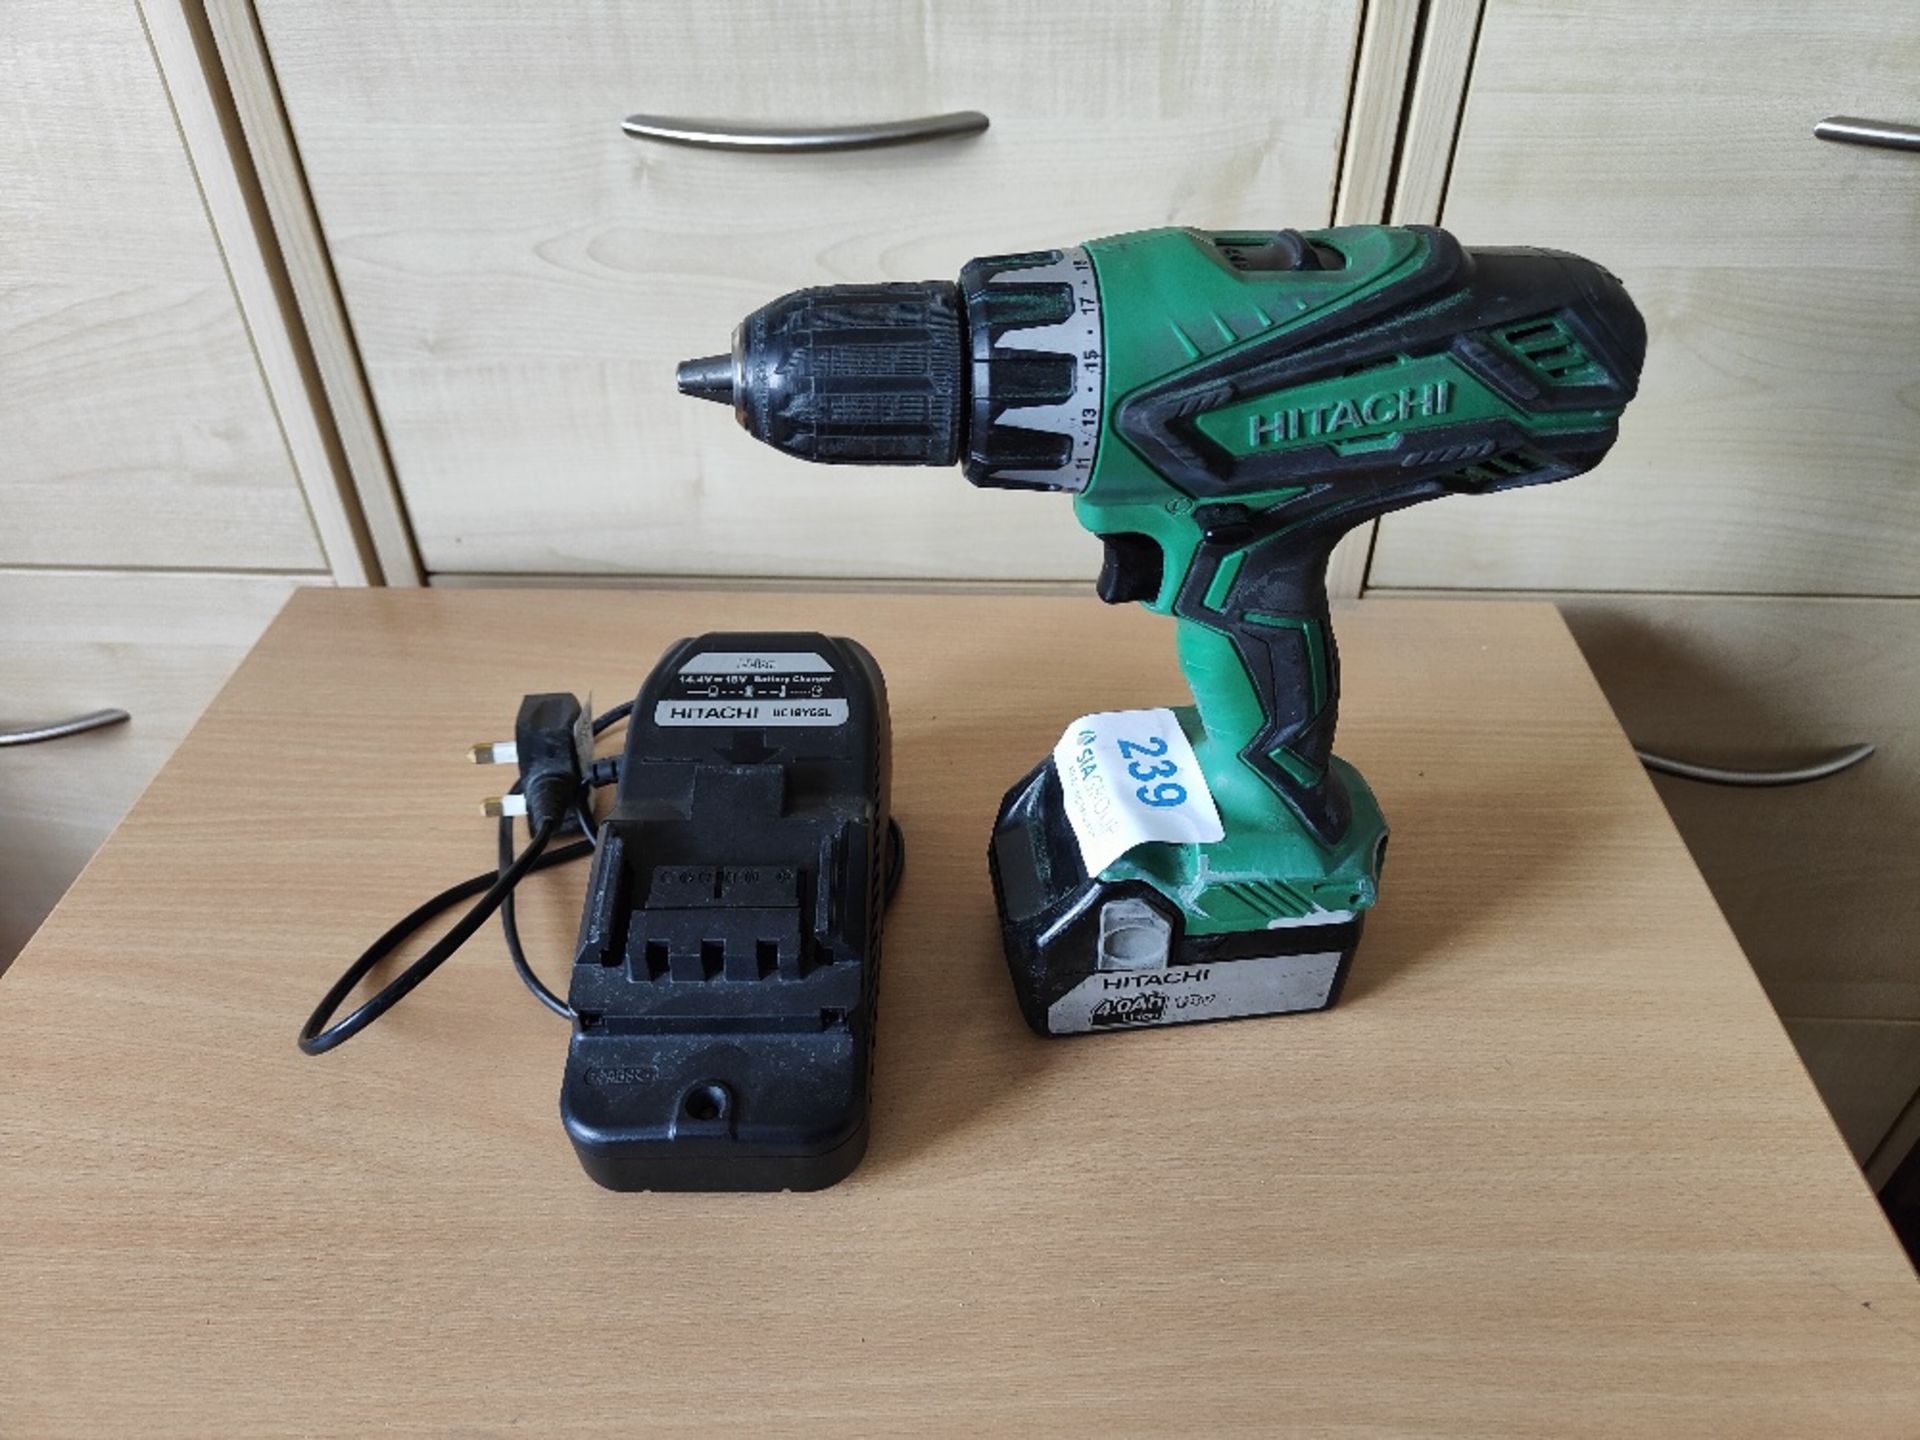 Hitachi cordless drill with battery and charger